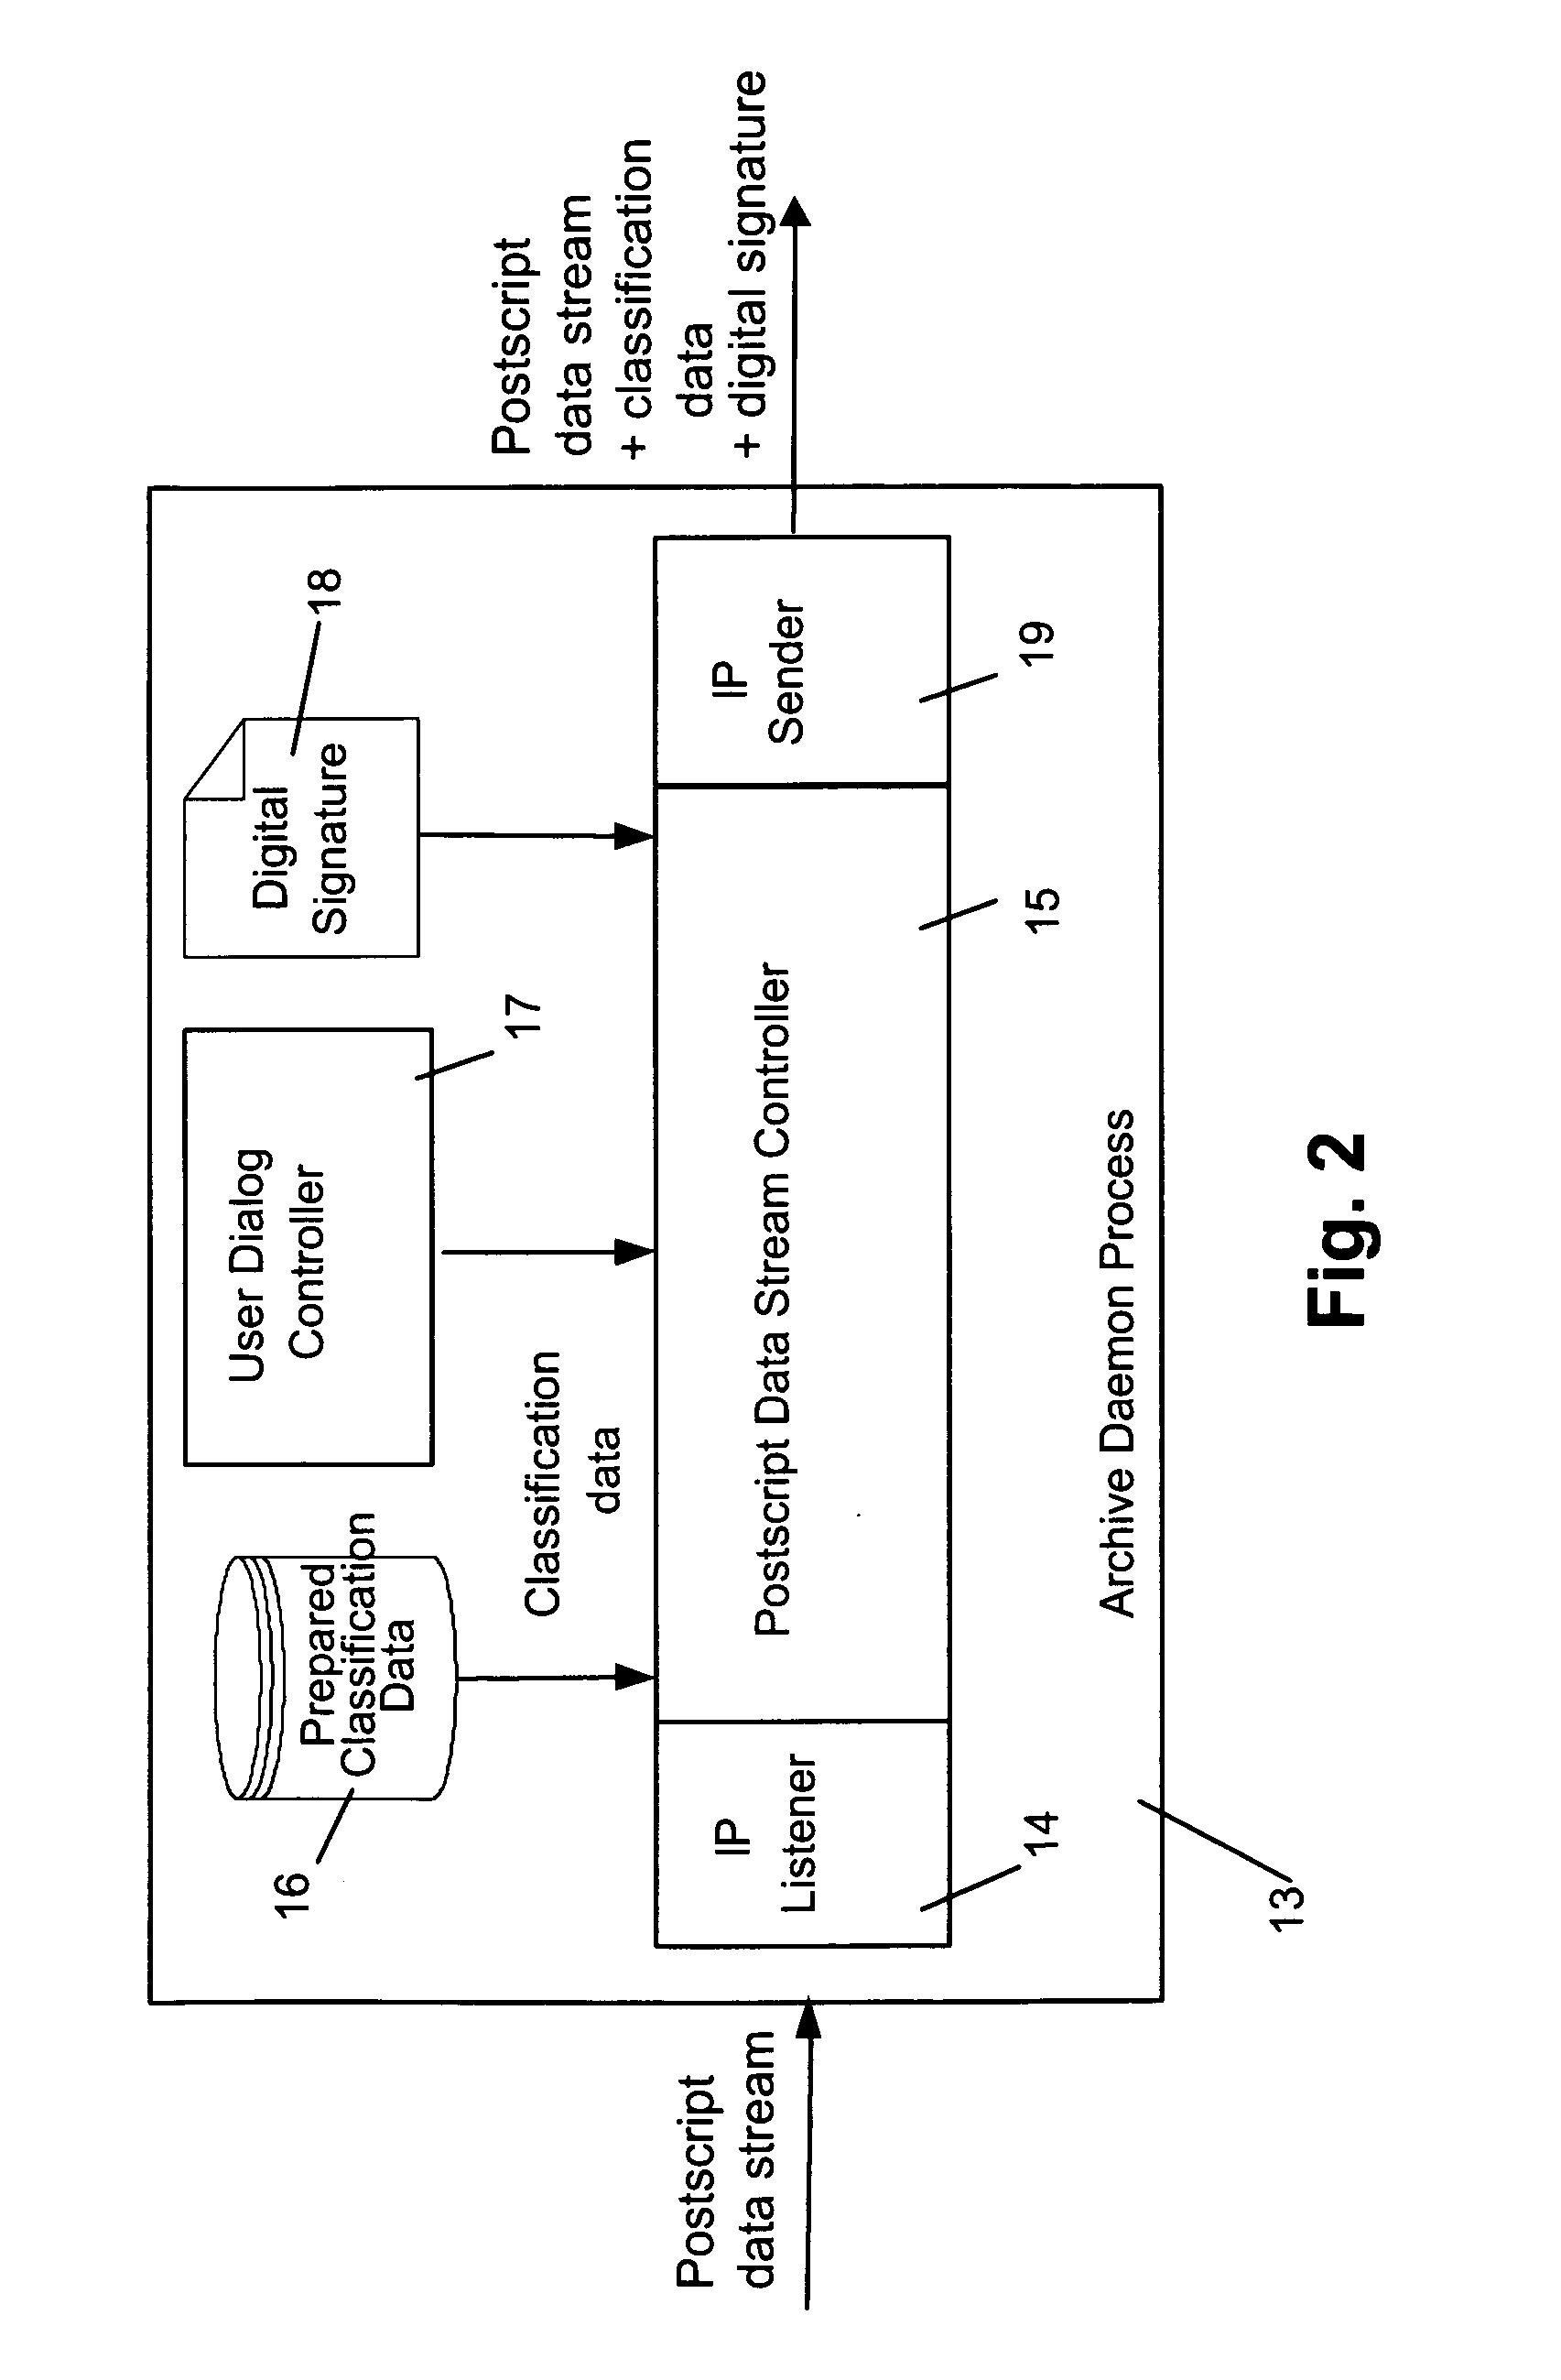 System, method and program product for electronically filing documents